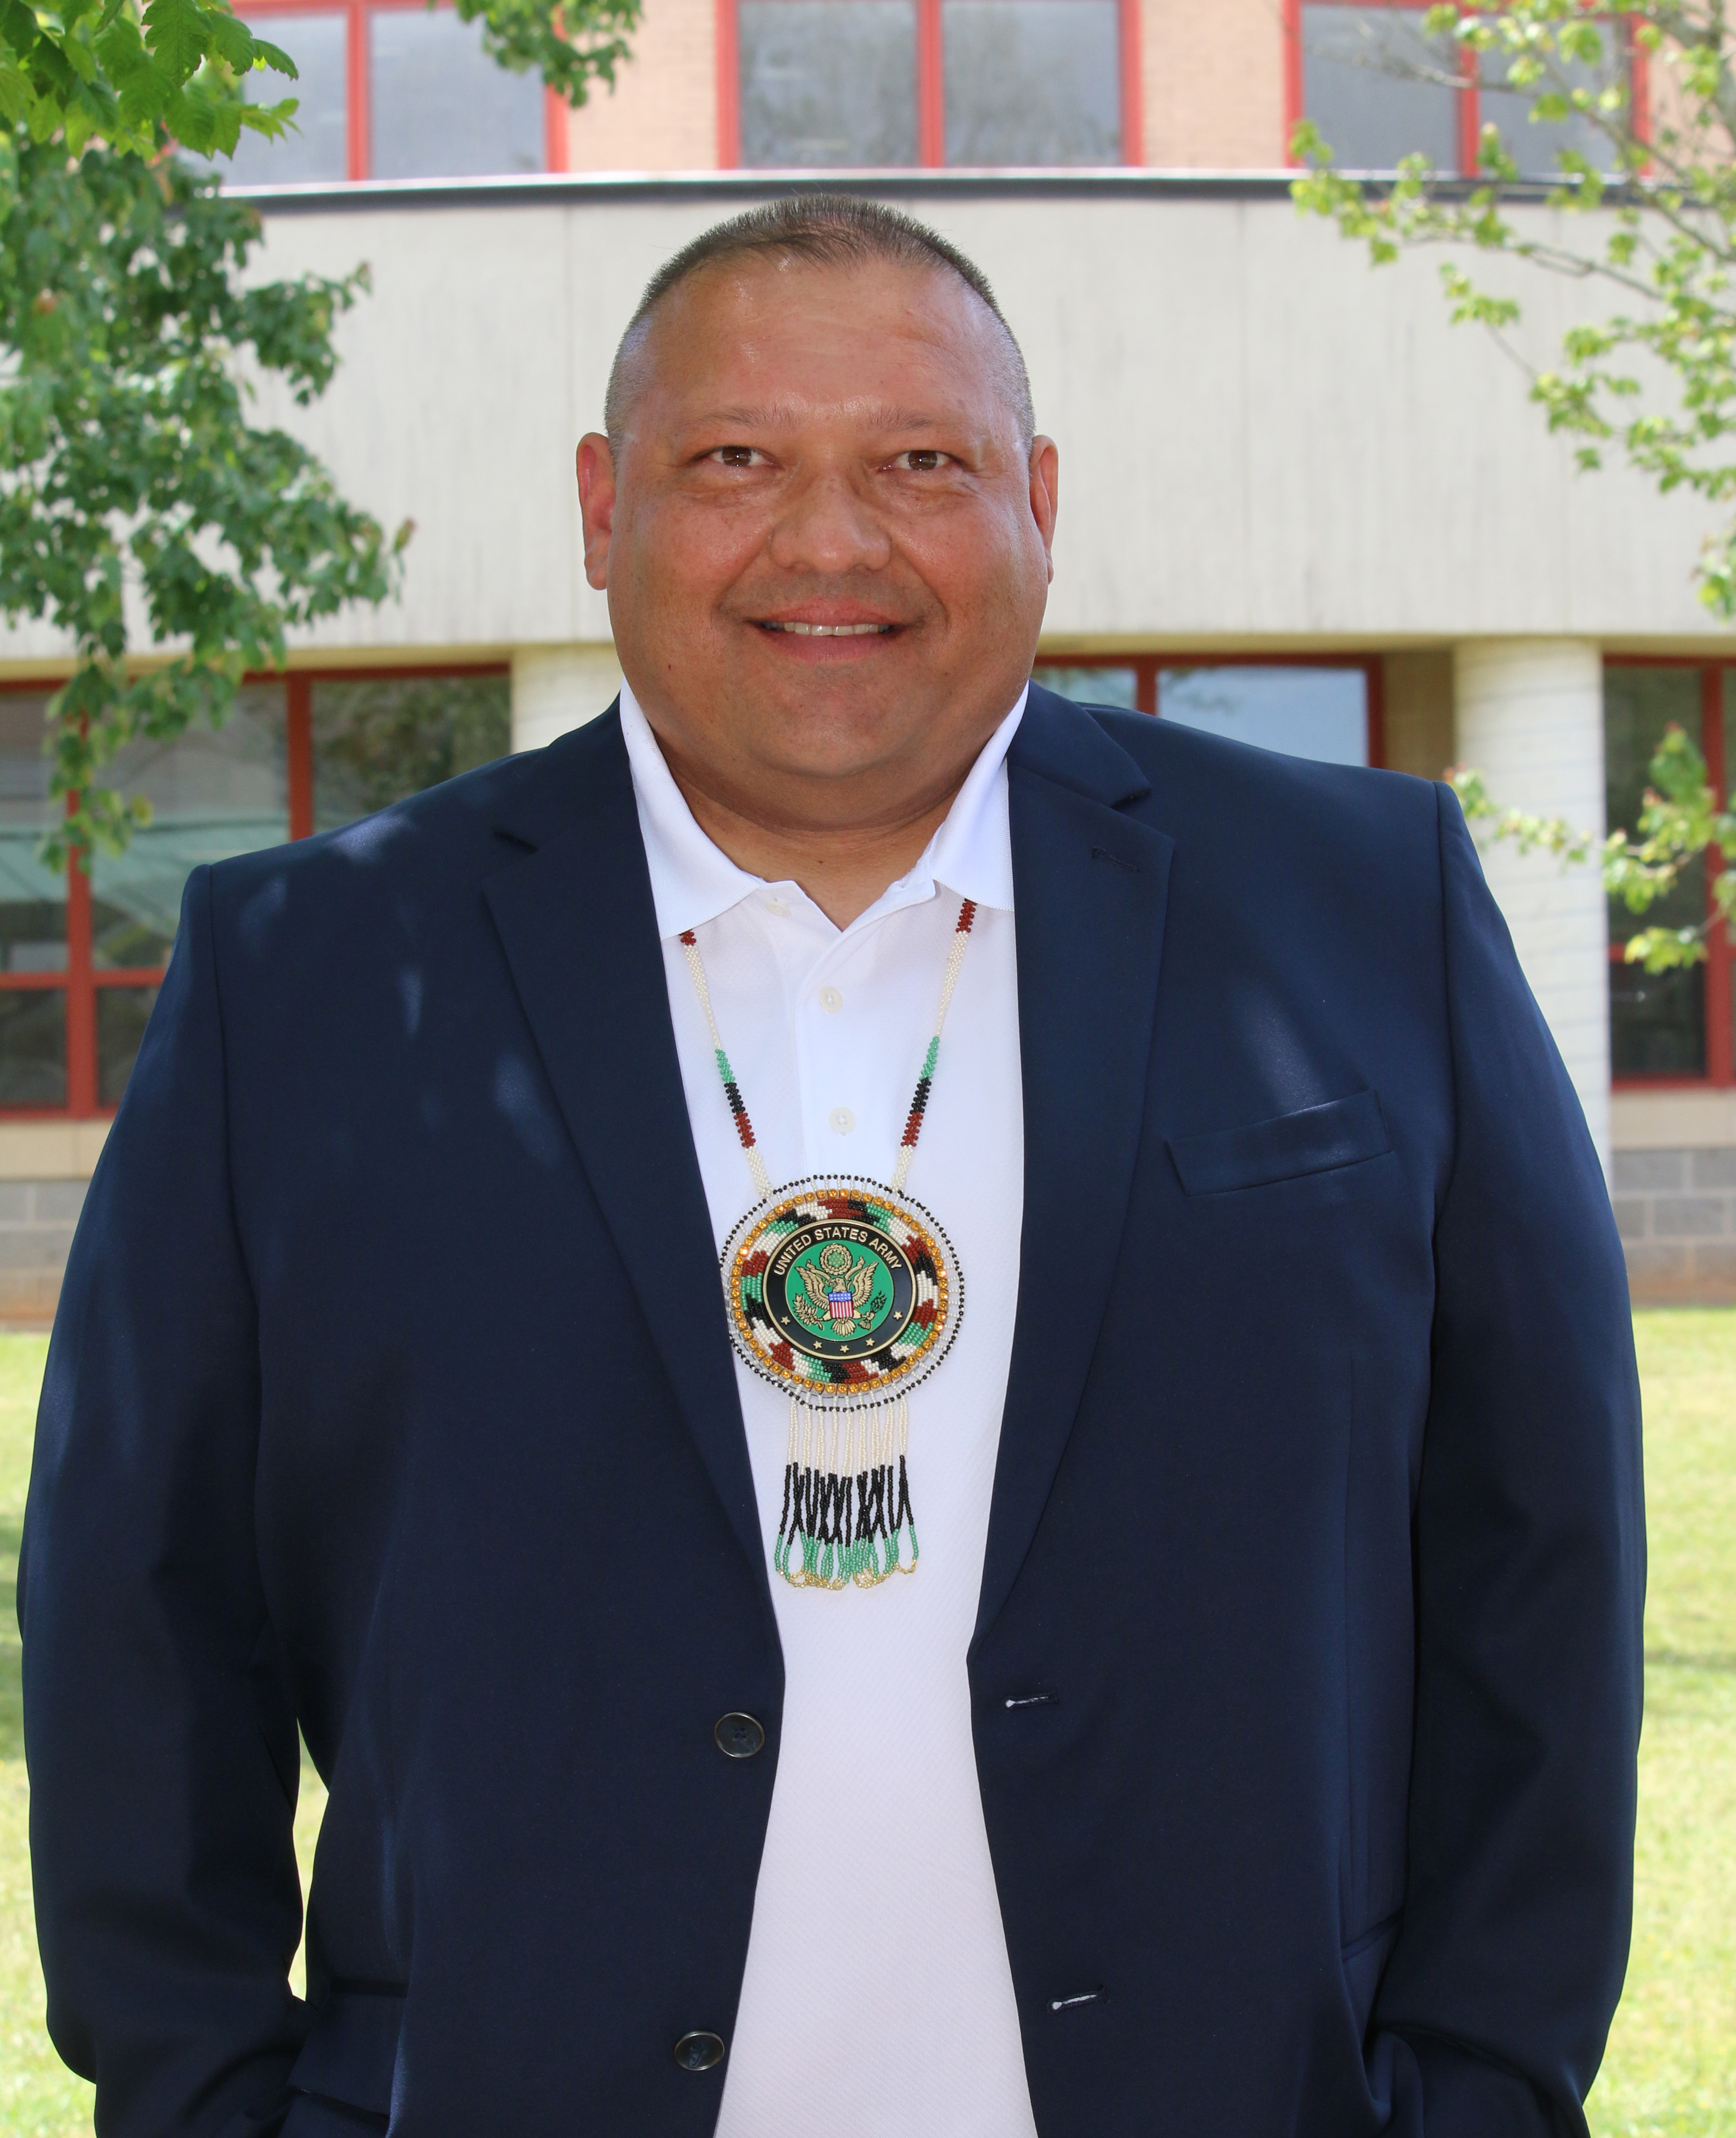 Native American, Ed Routh, outstanding graduate student at MSU-Meridian